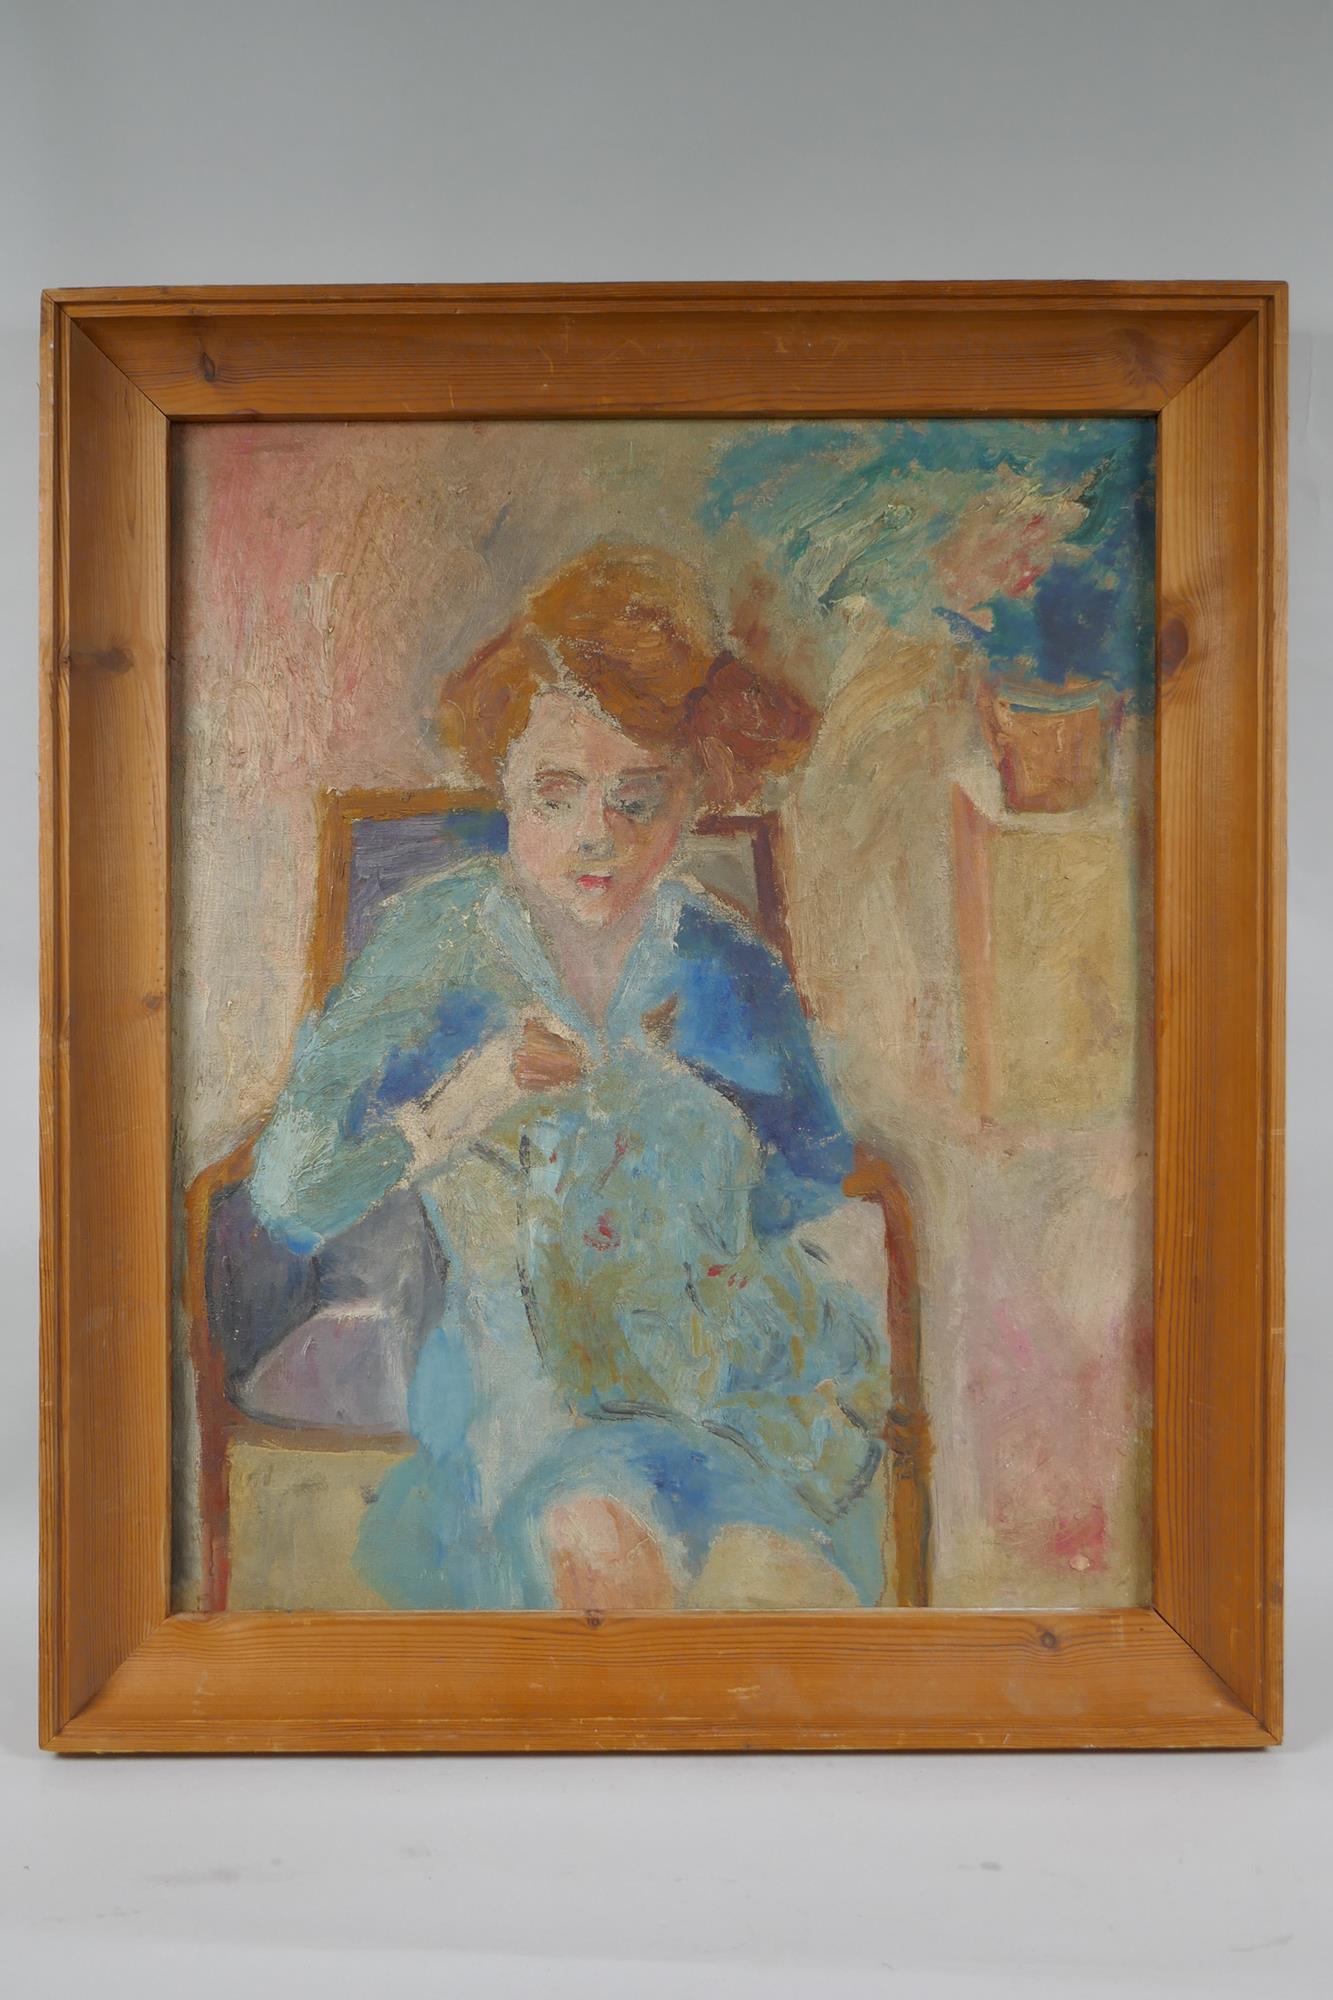 Modern British School, portrait of a seated lady sewing, oil on canvas, 53 x 43cm - Image 2 of 4